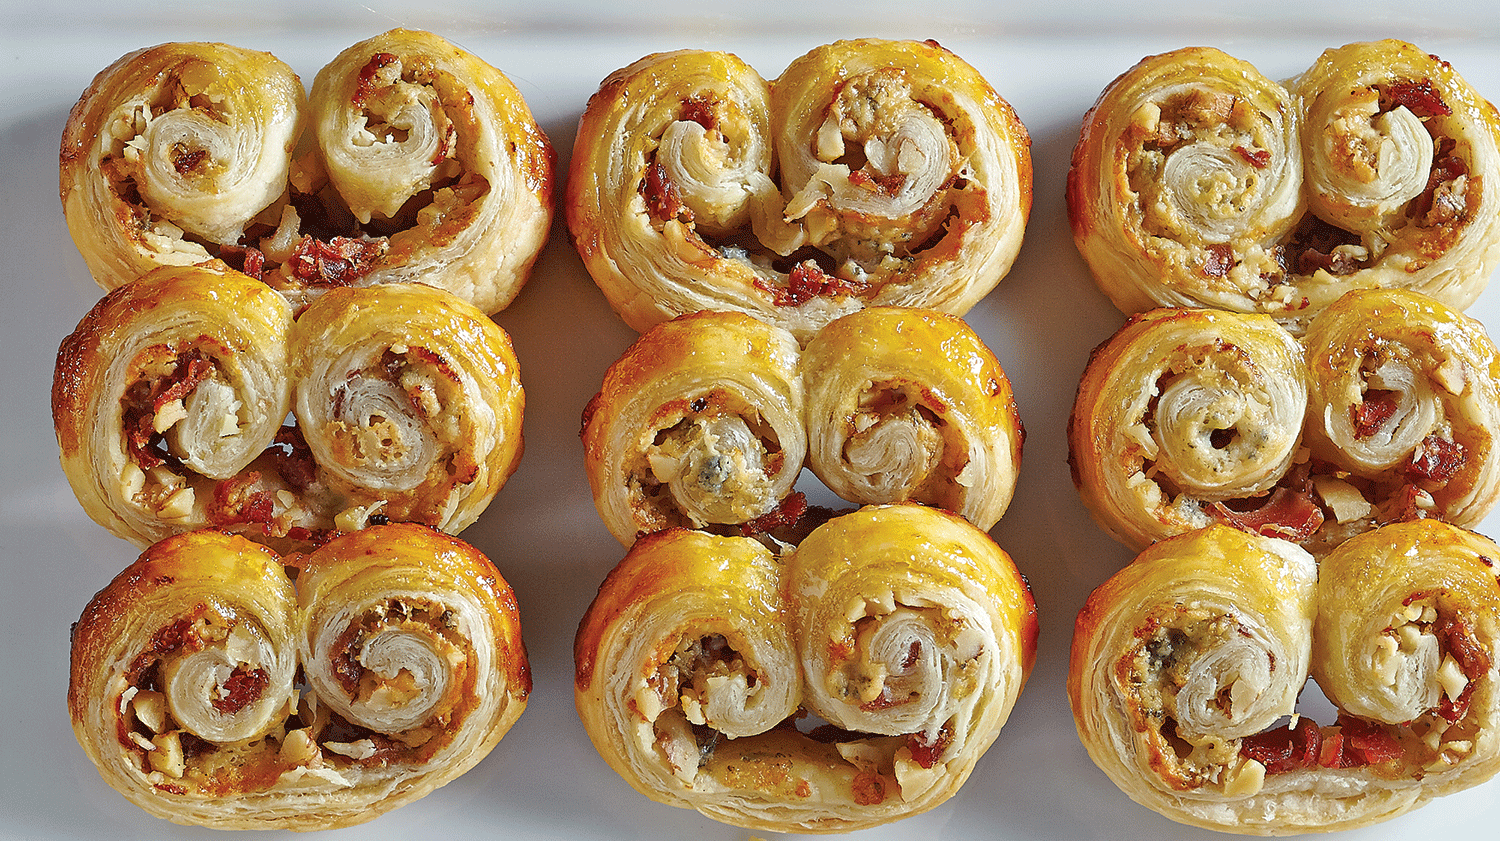 Blue Cheese & Prosciutto Palmiers